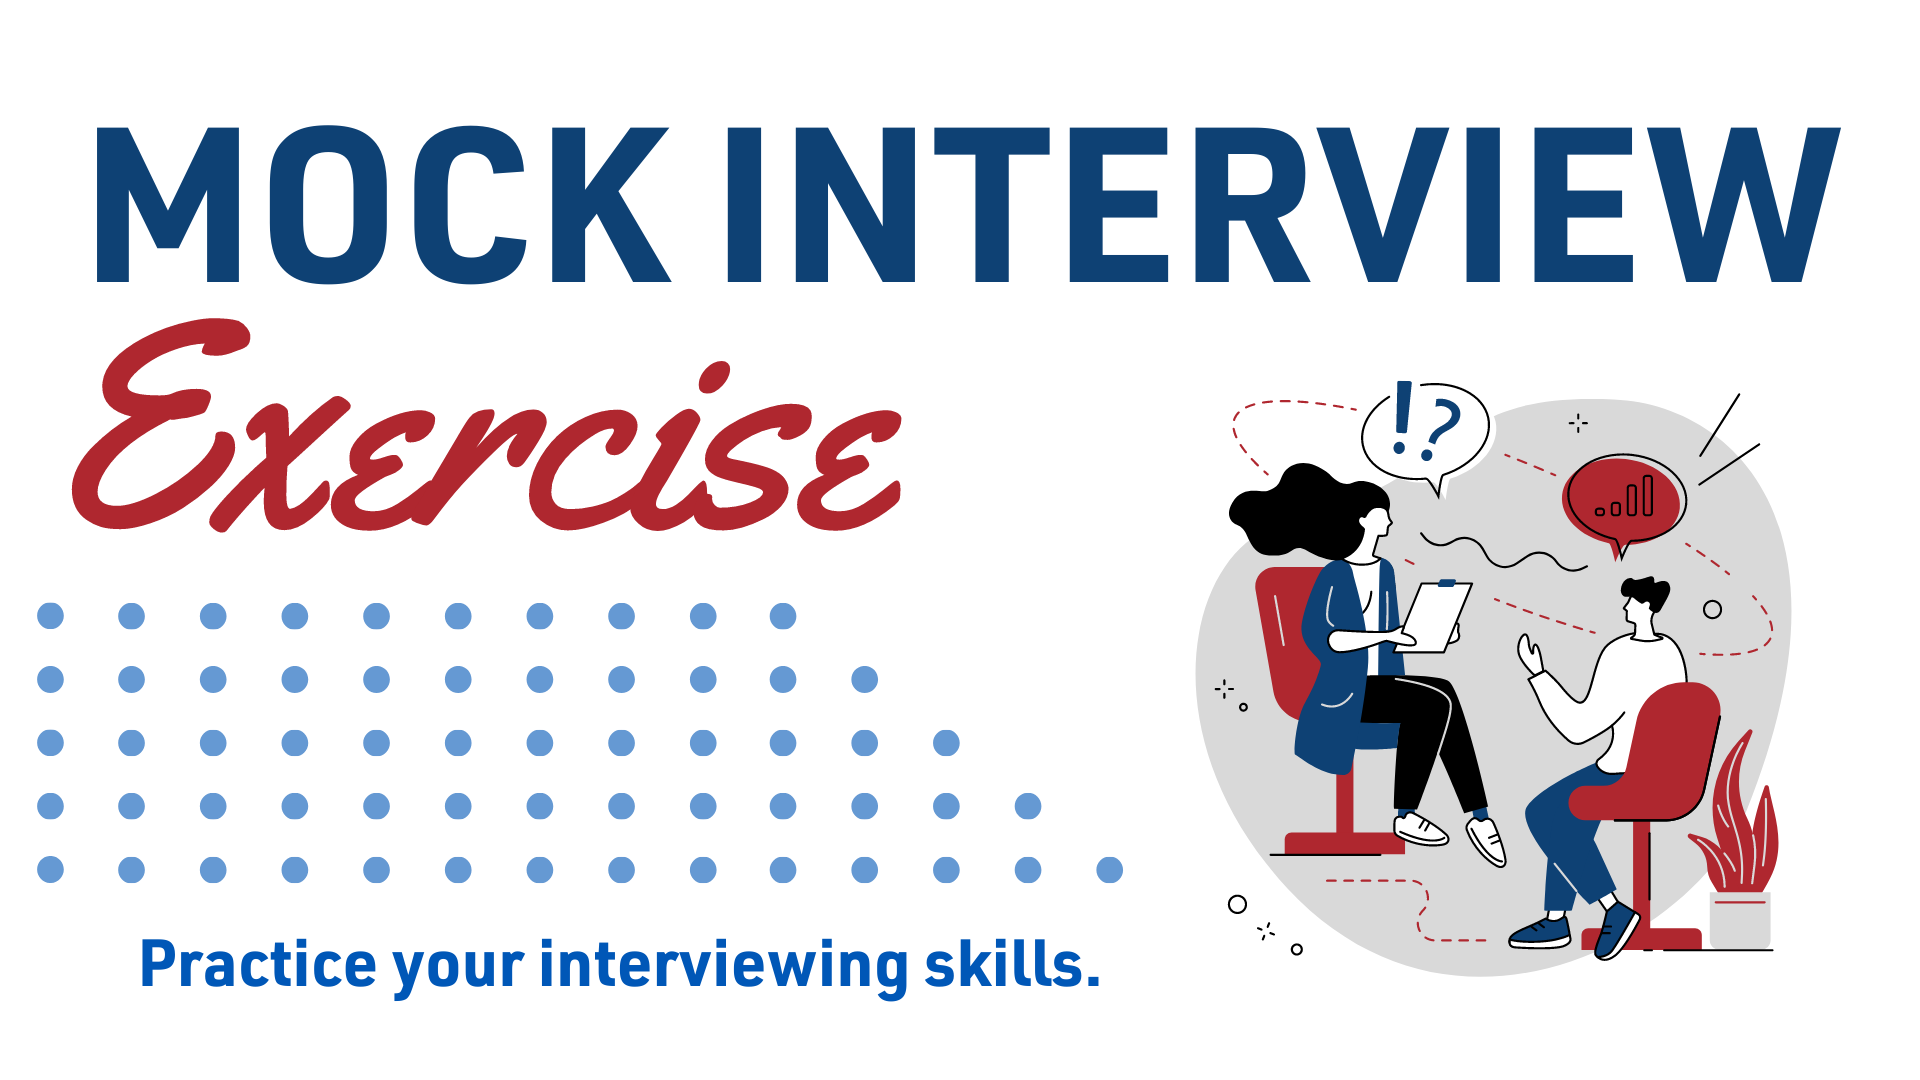 Mock Interview Exercise